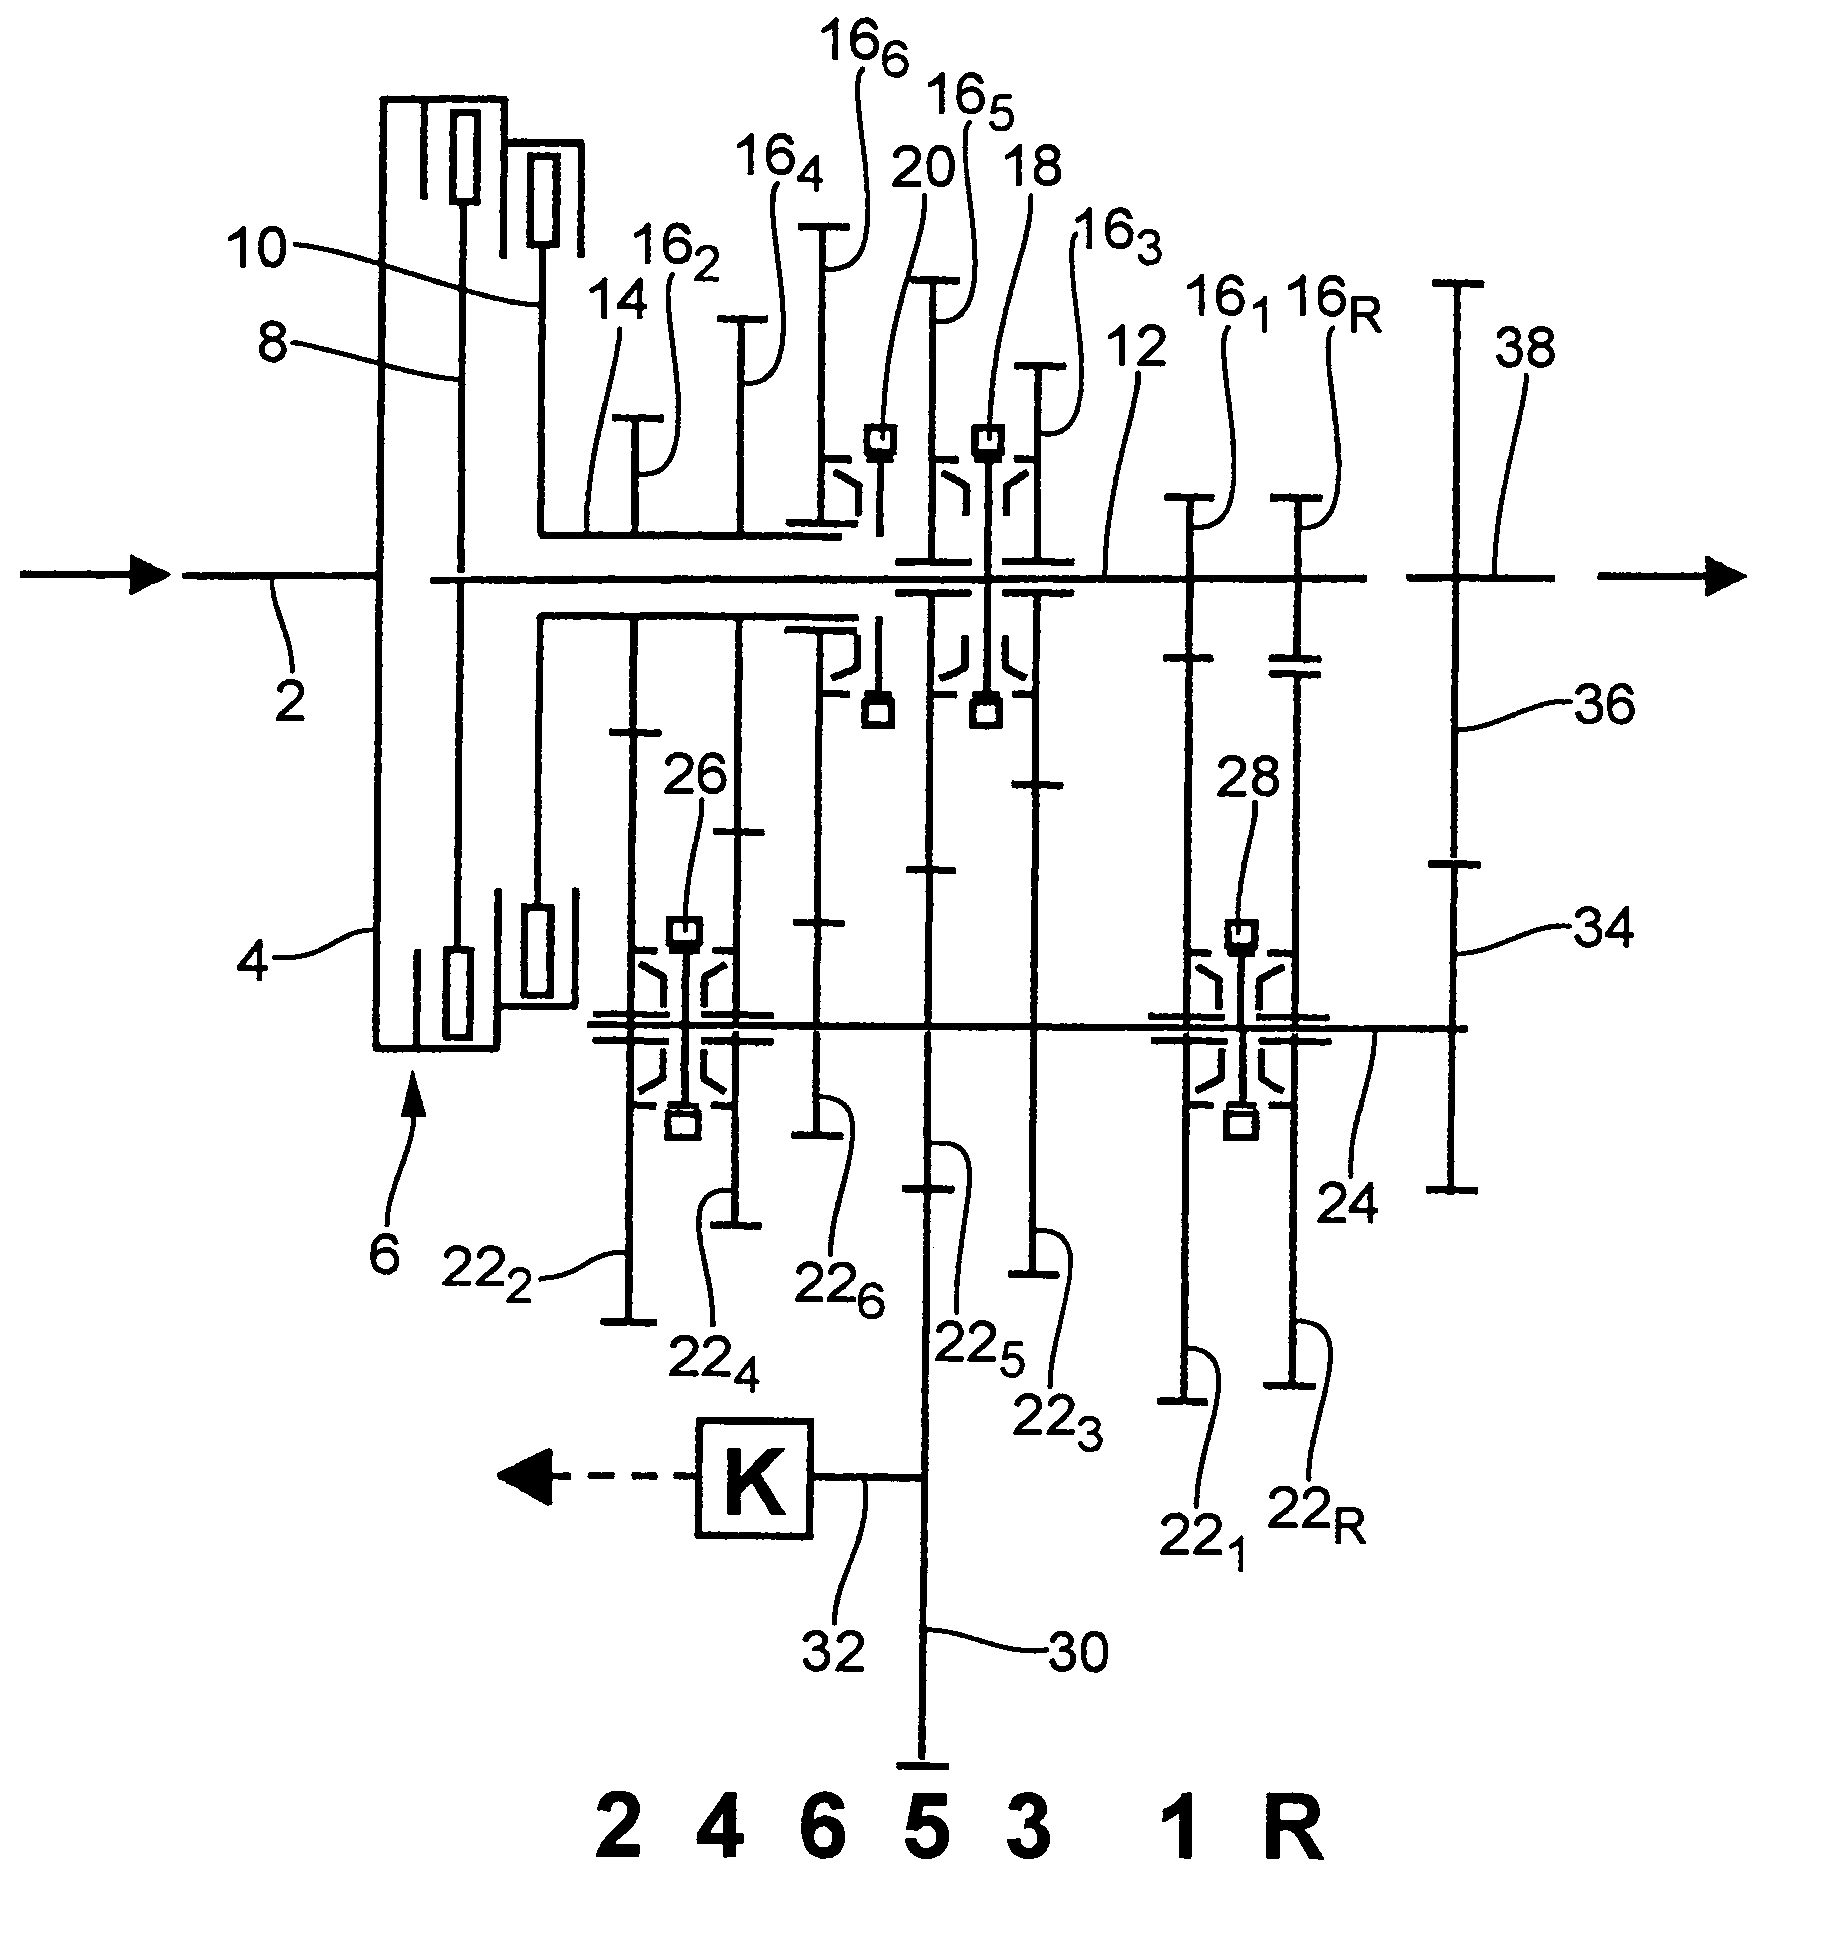 Parallel manual transmission for four-wheel drive and parallel manual transmission for transverse installation in a front-wheel drive vehicle